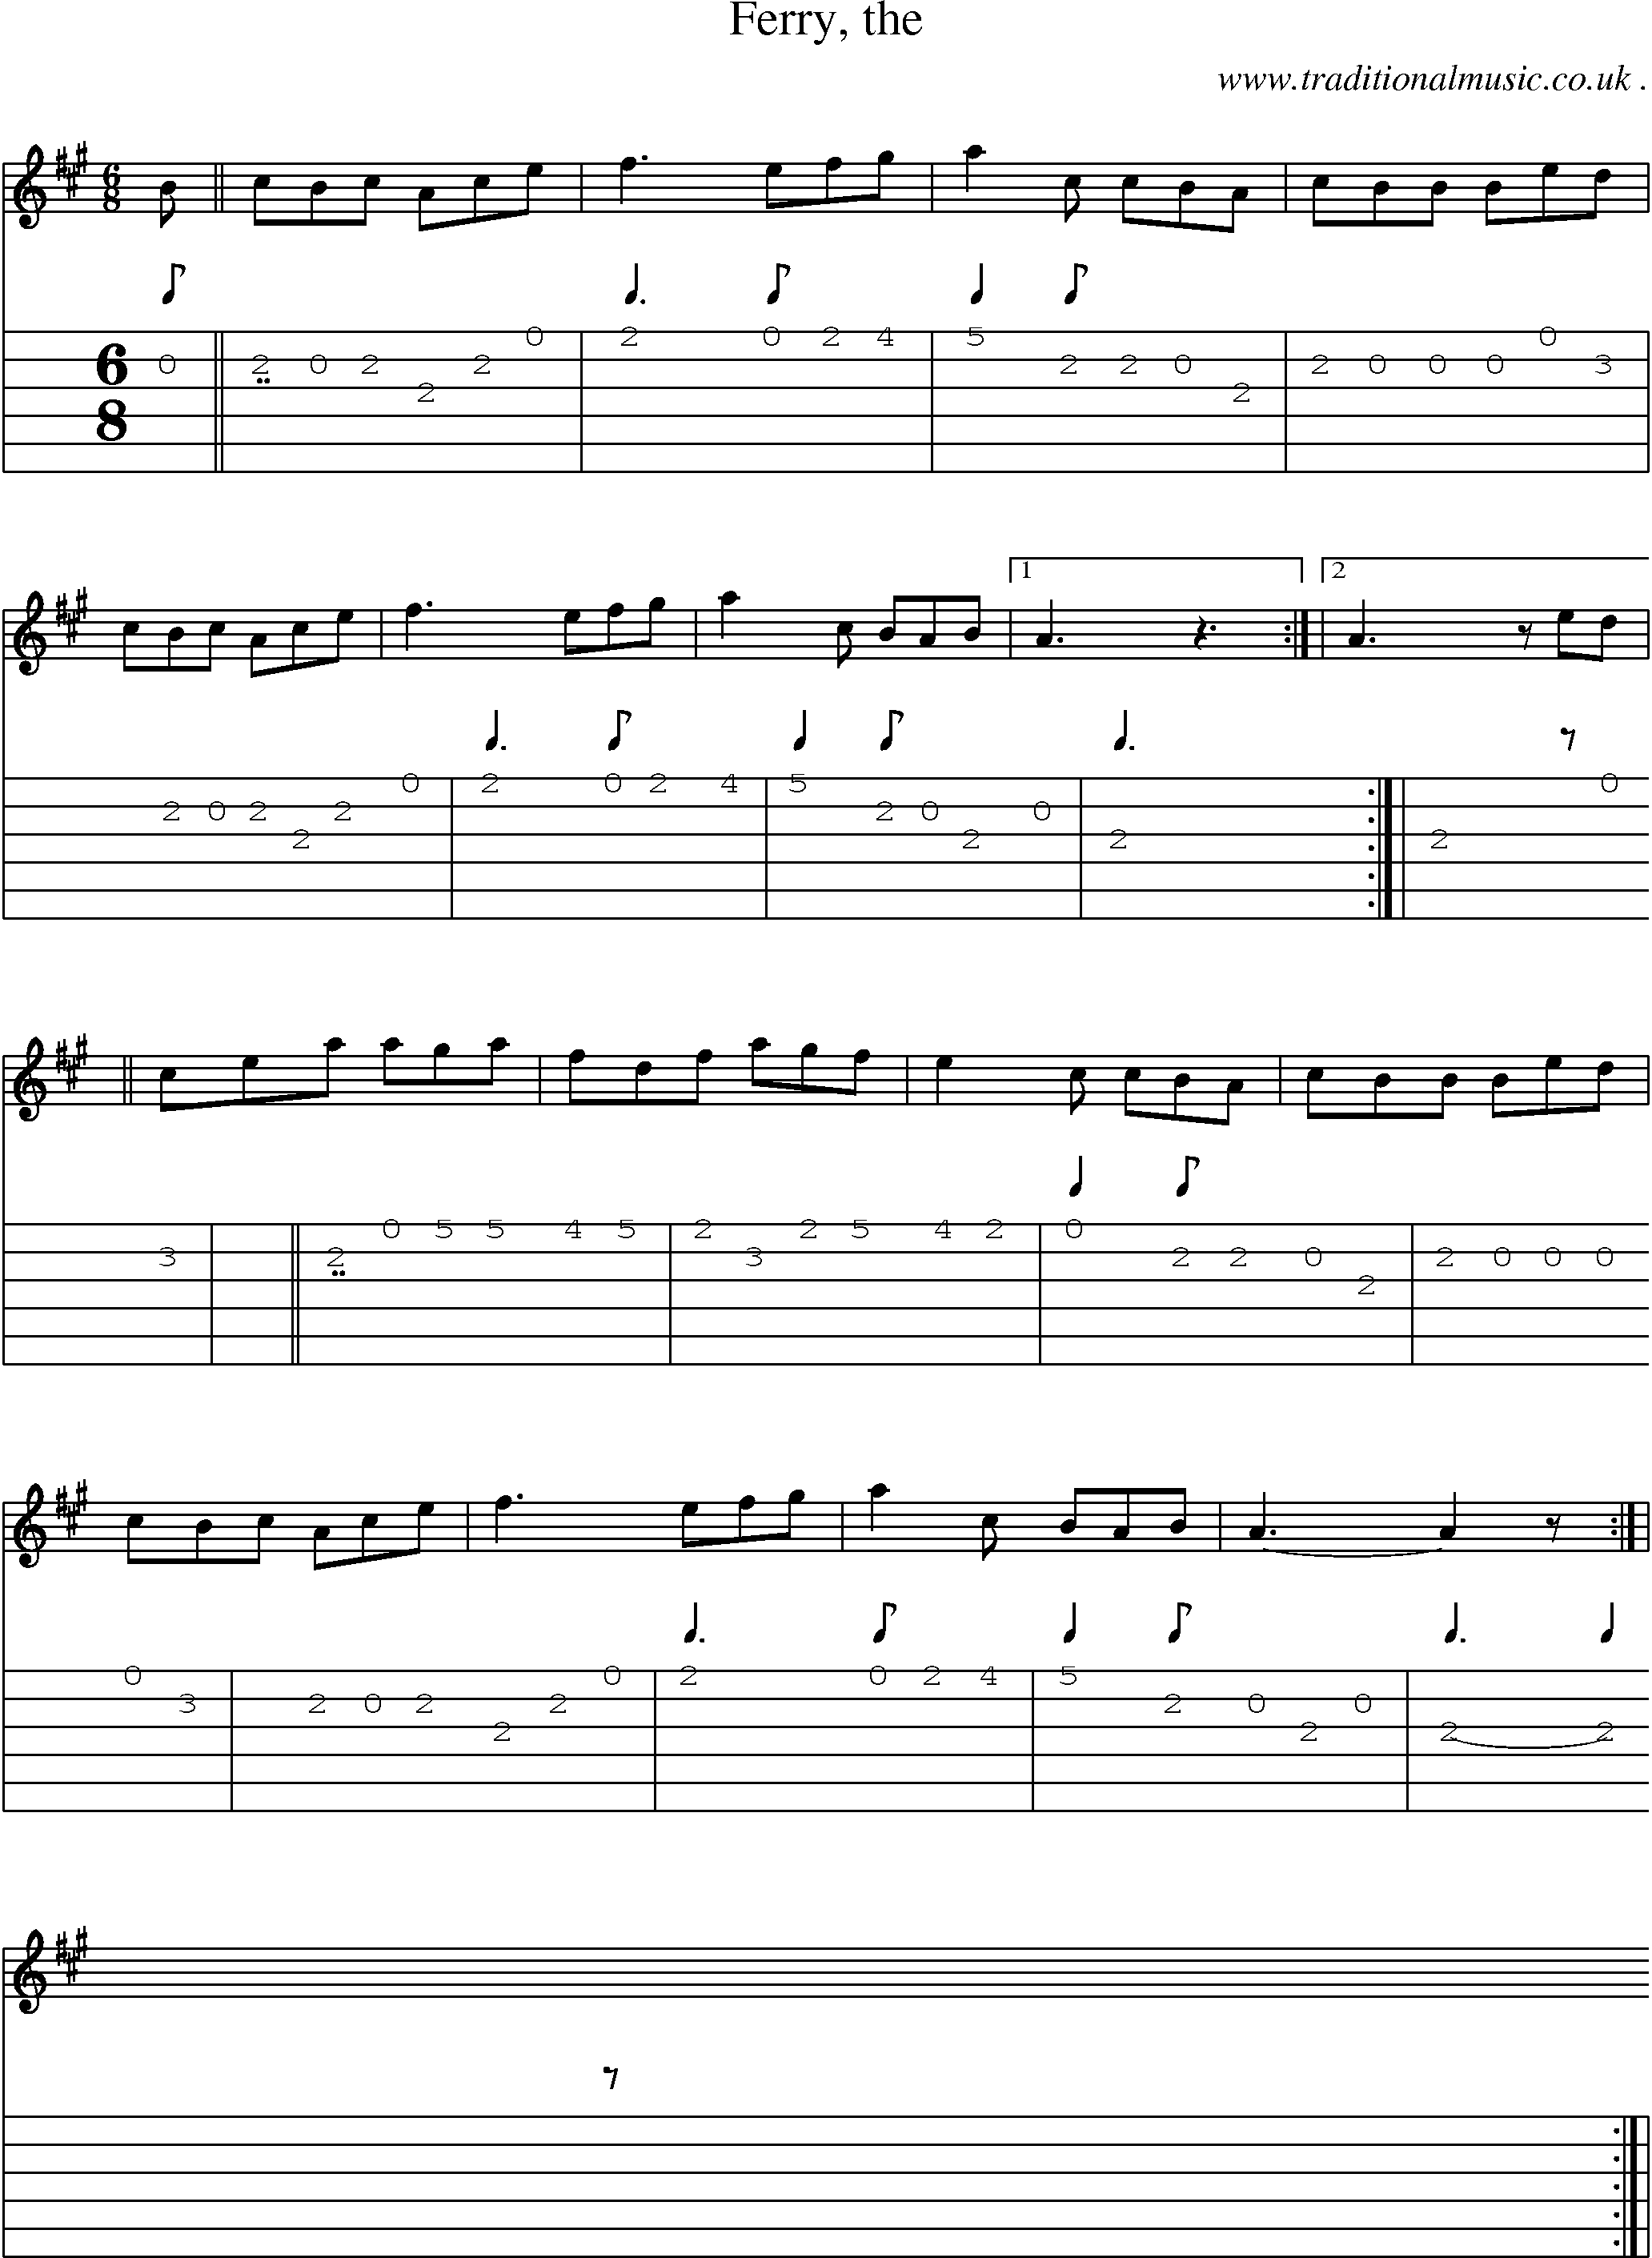 Sheet-music  score, Chords and Guitar Tabs for Ferry The